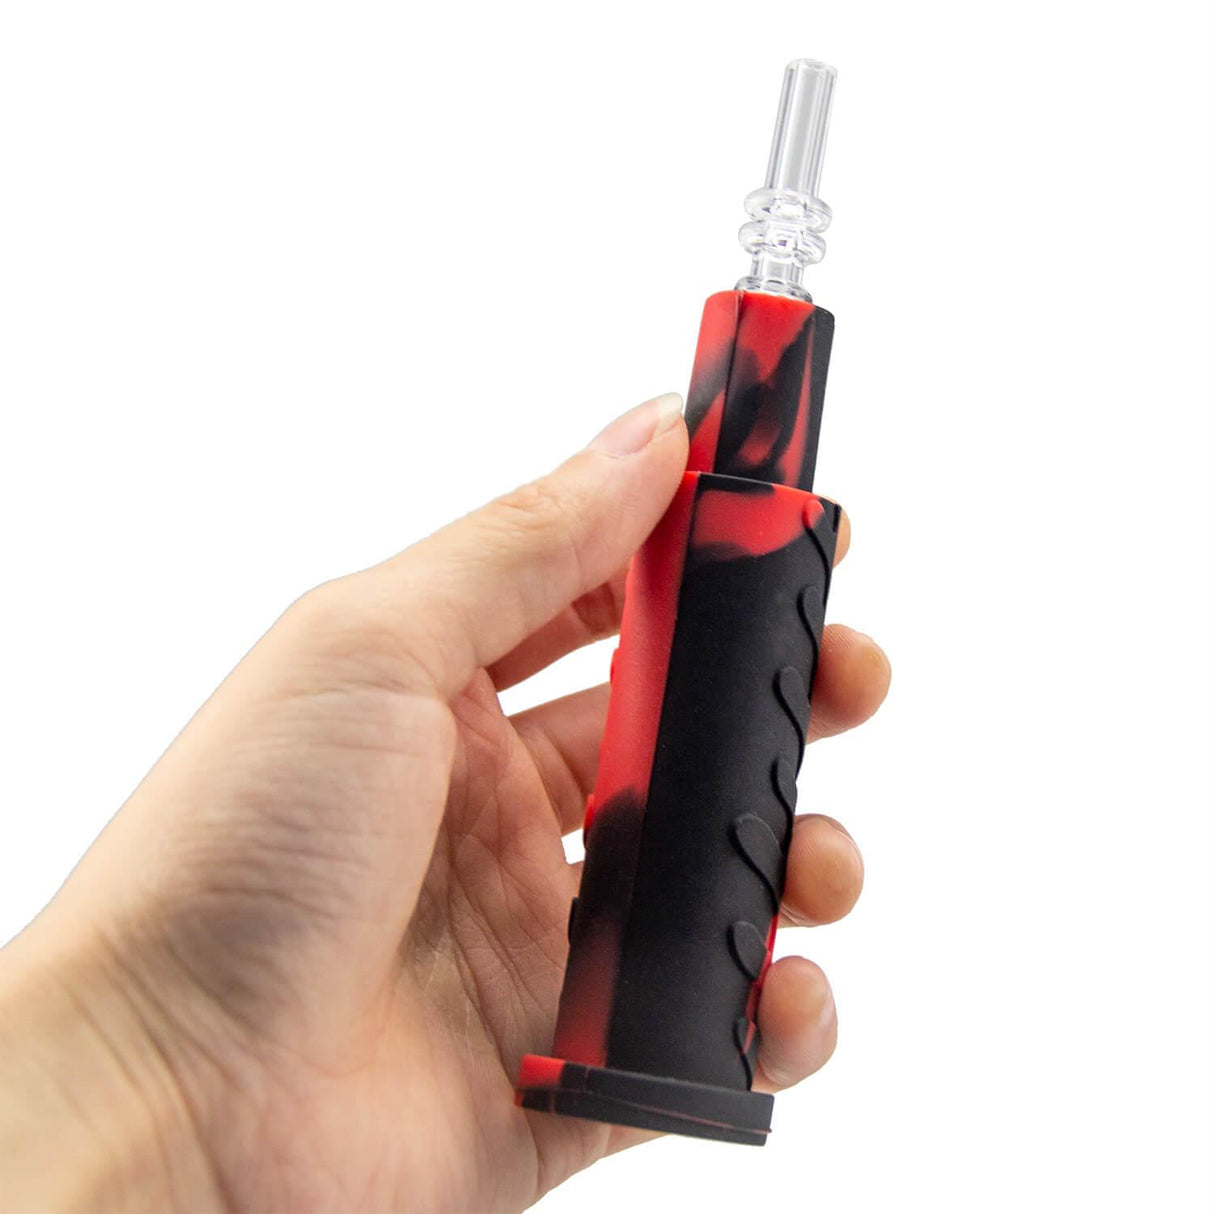 PILOT DIARY Honey Straw Nectar Collector Kit held in hand, side view, portable design with red and black colors